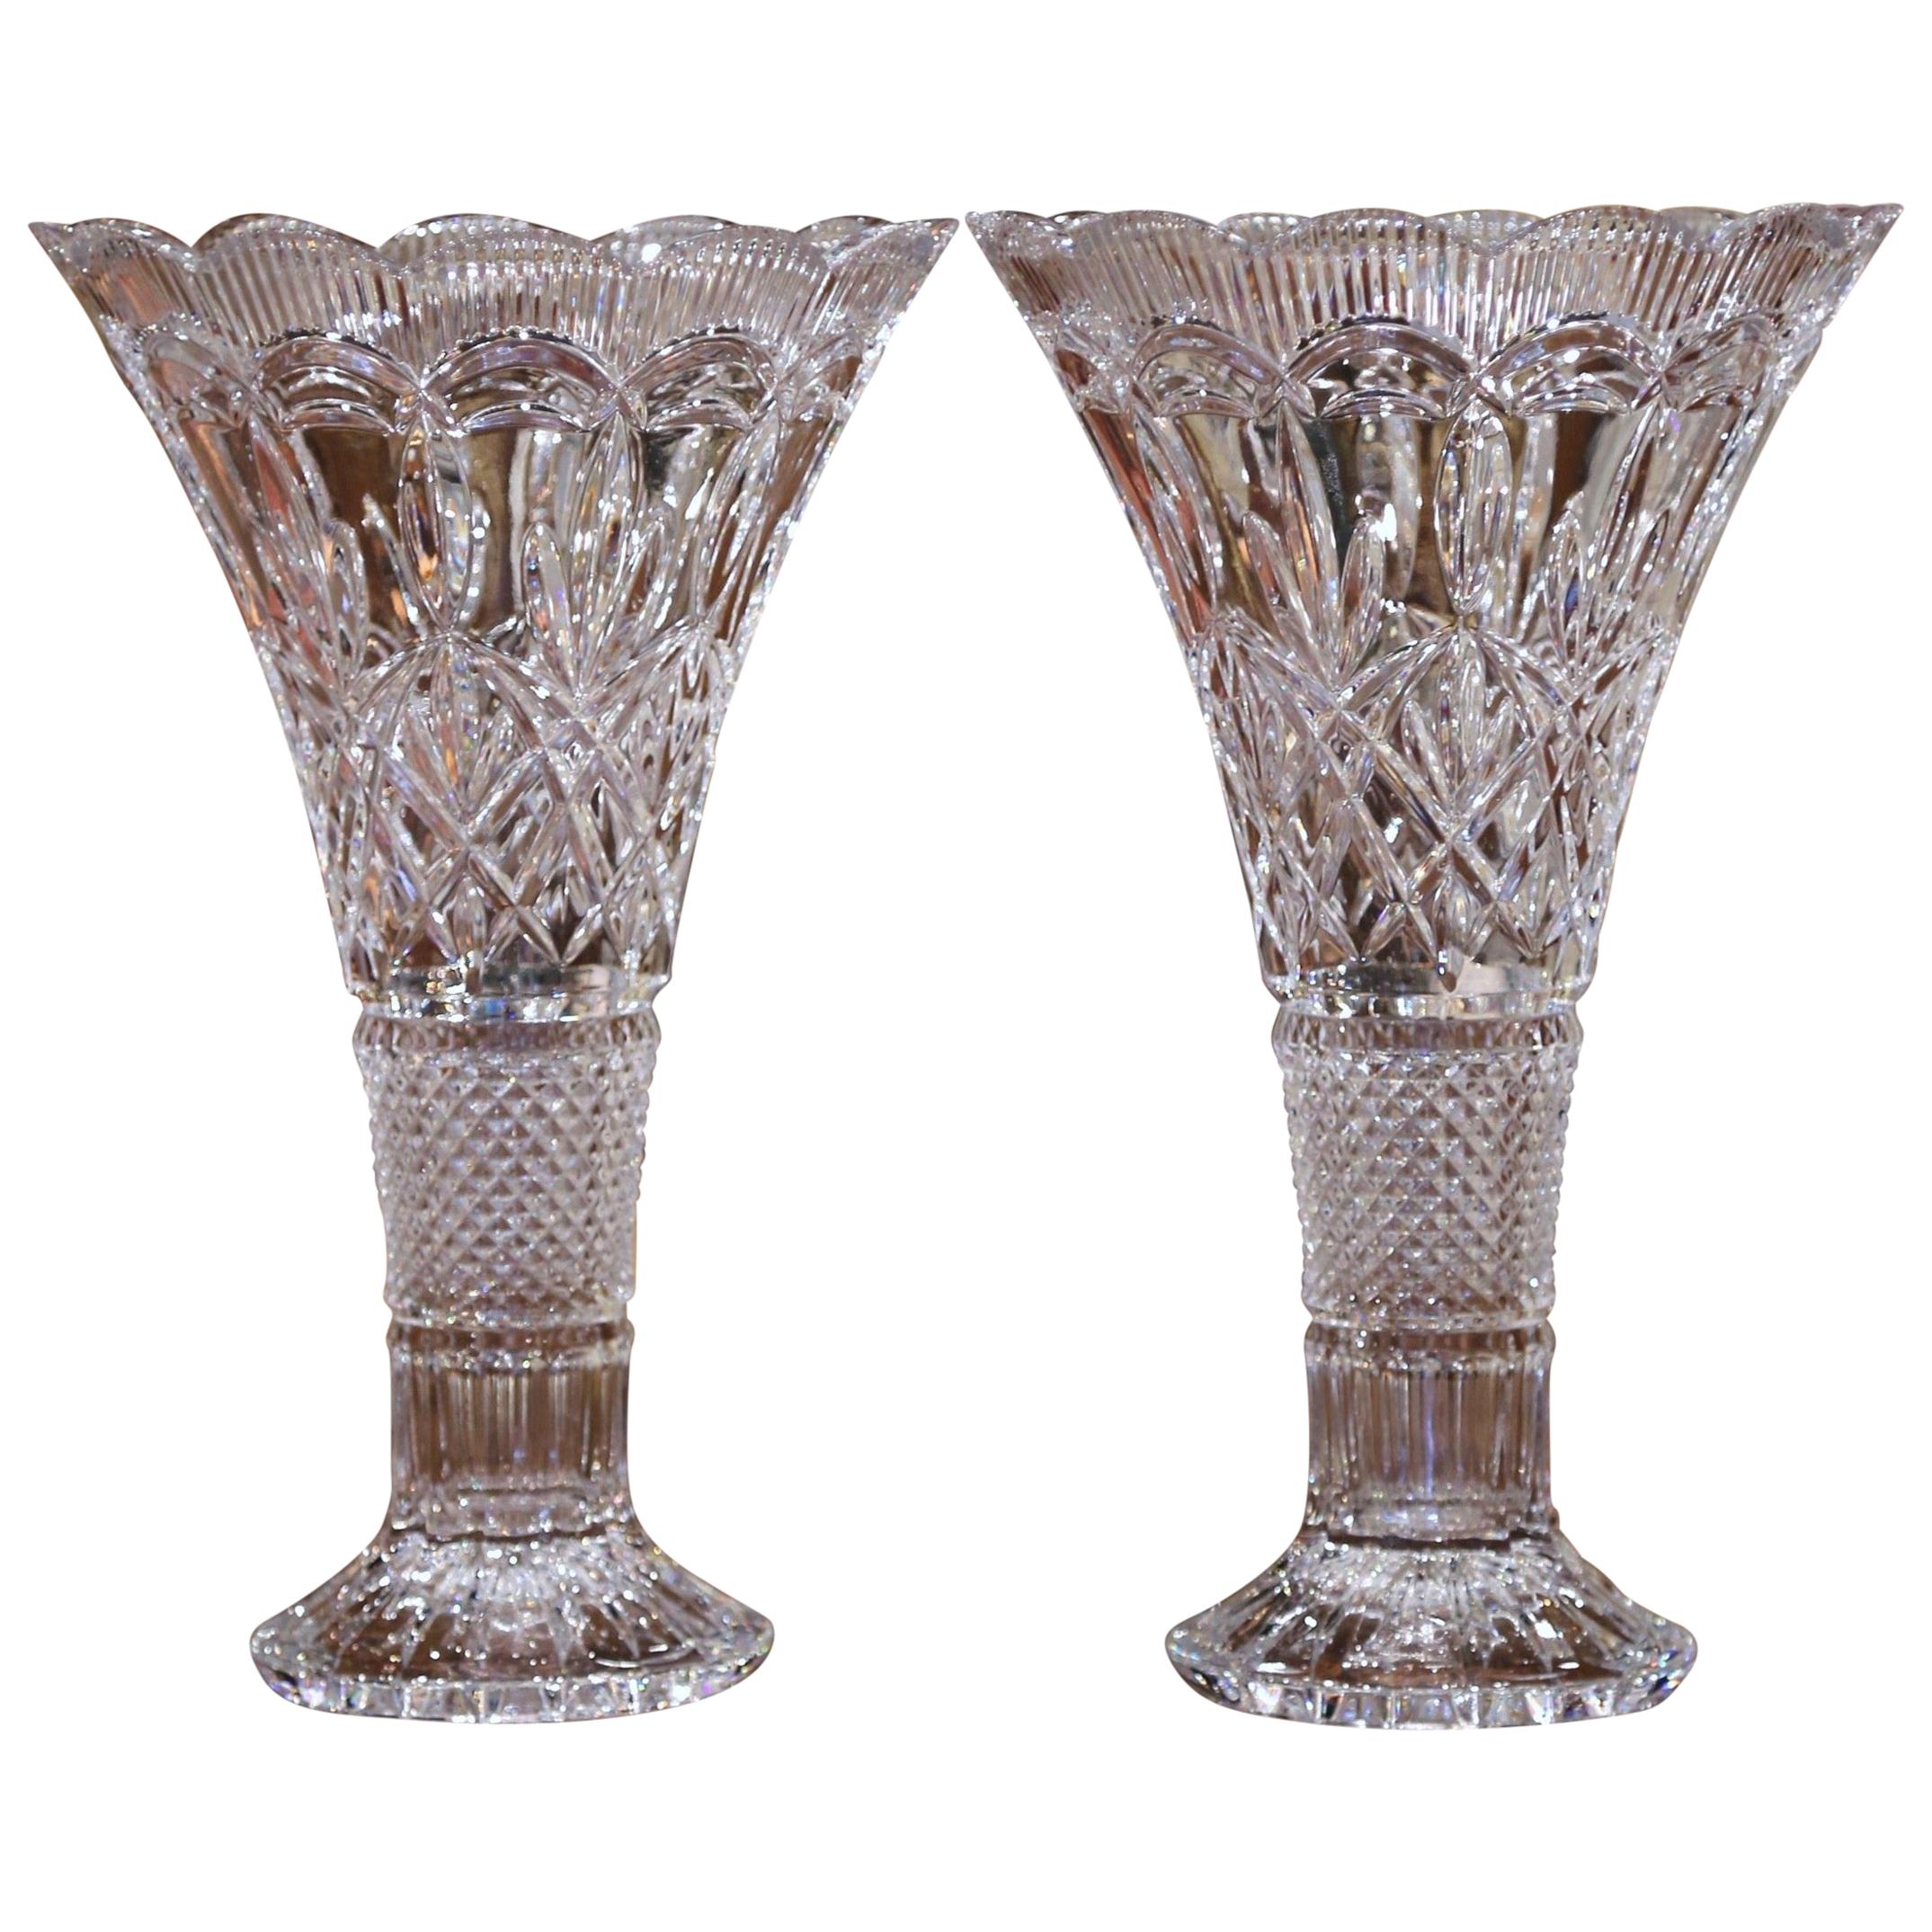 Pair of Midcentury French Clear Cut Crystal Trumpet Vases with Leaf Motifs